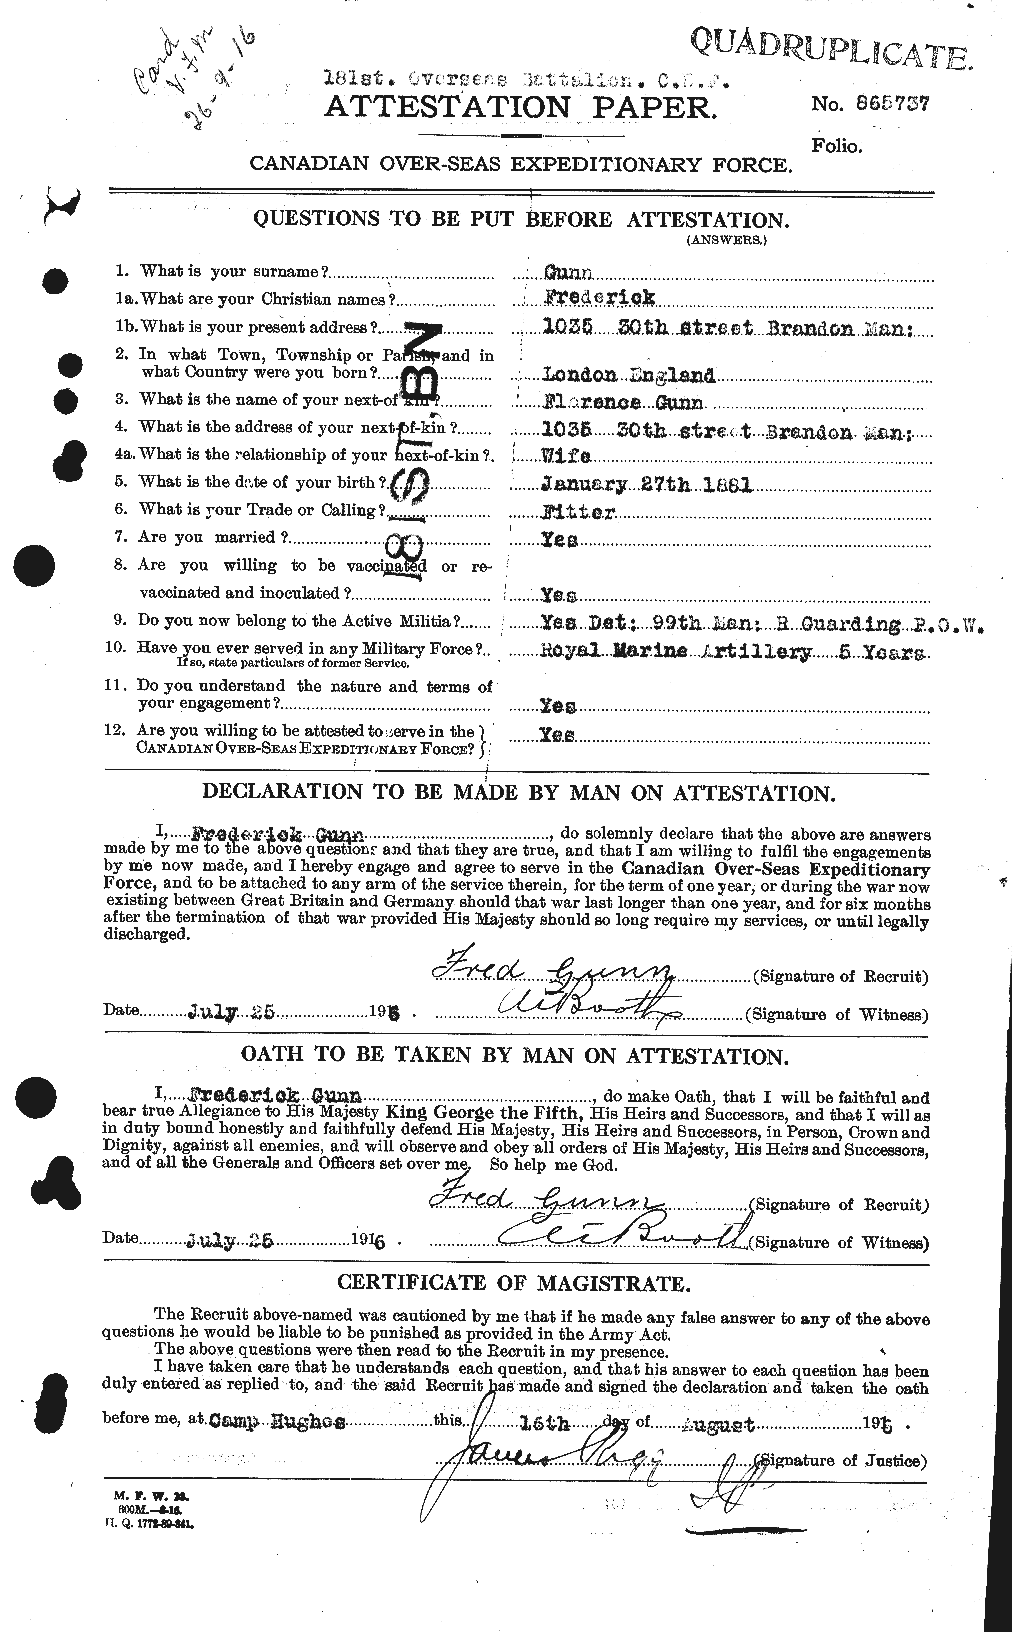 Personnel Records of the First World War - CEF 369234a